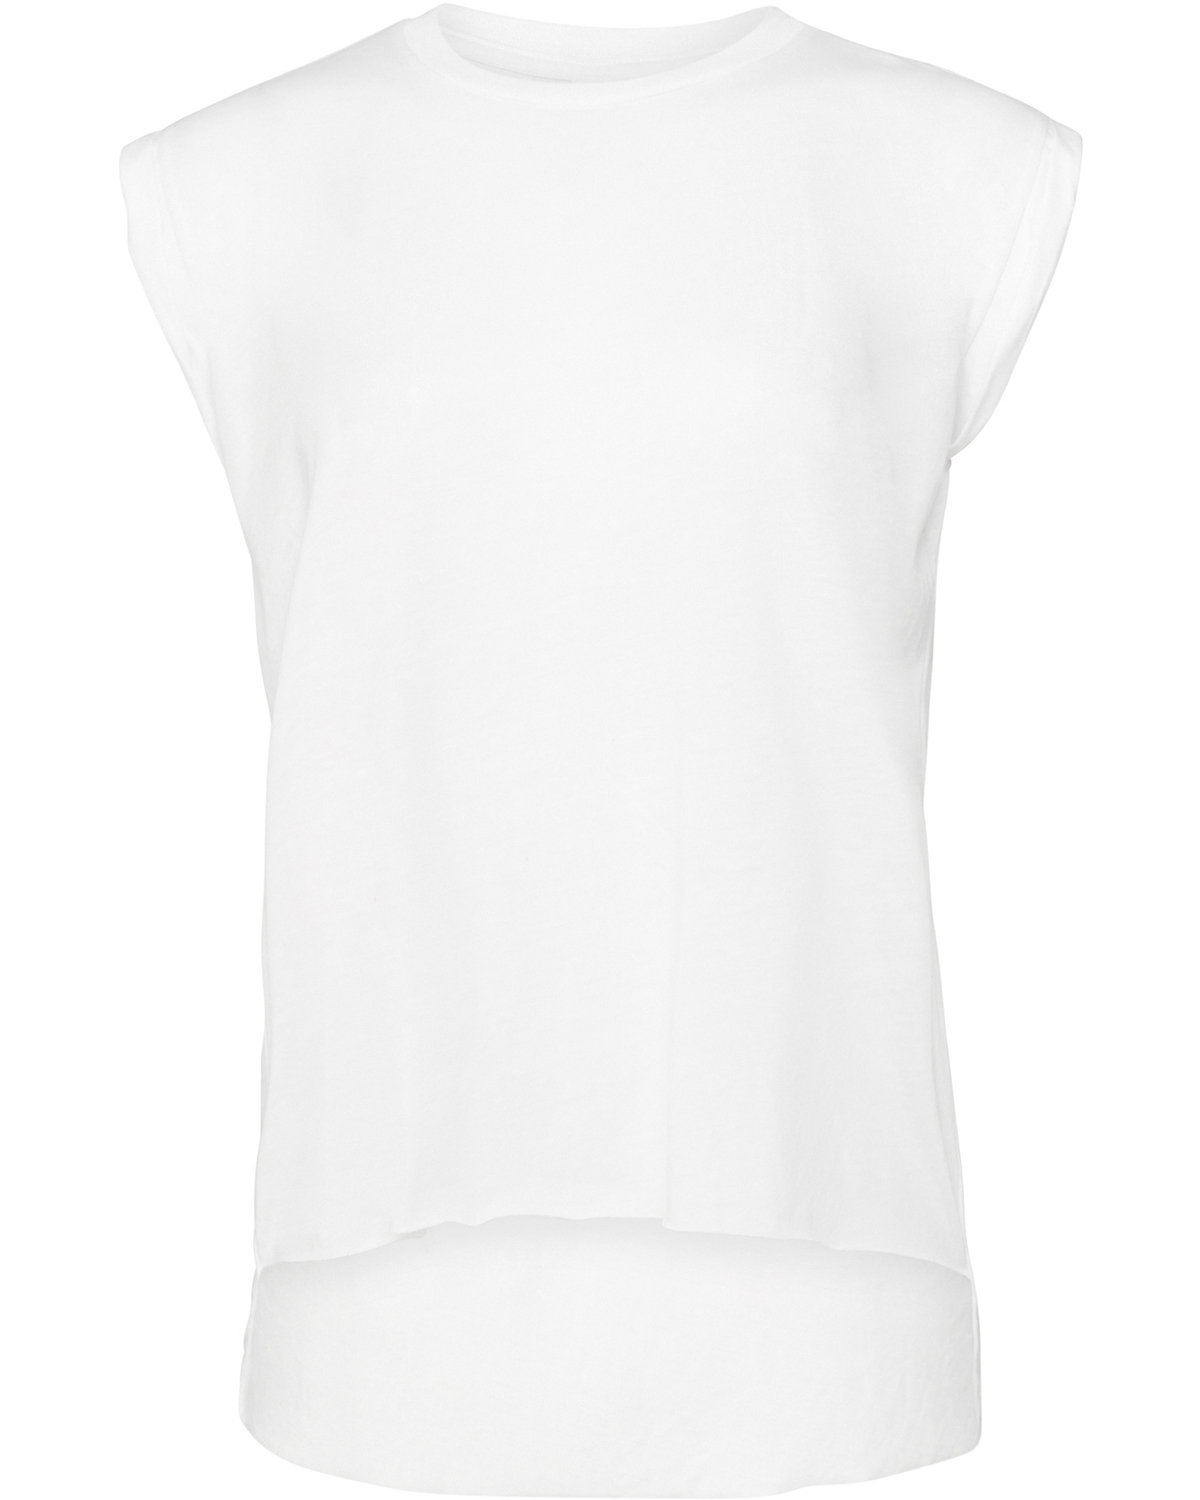 Bella + Canvas Ladies' Flowy Muscle T-Shirt with Rolled Cuff | alphabroder